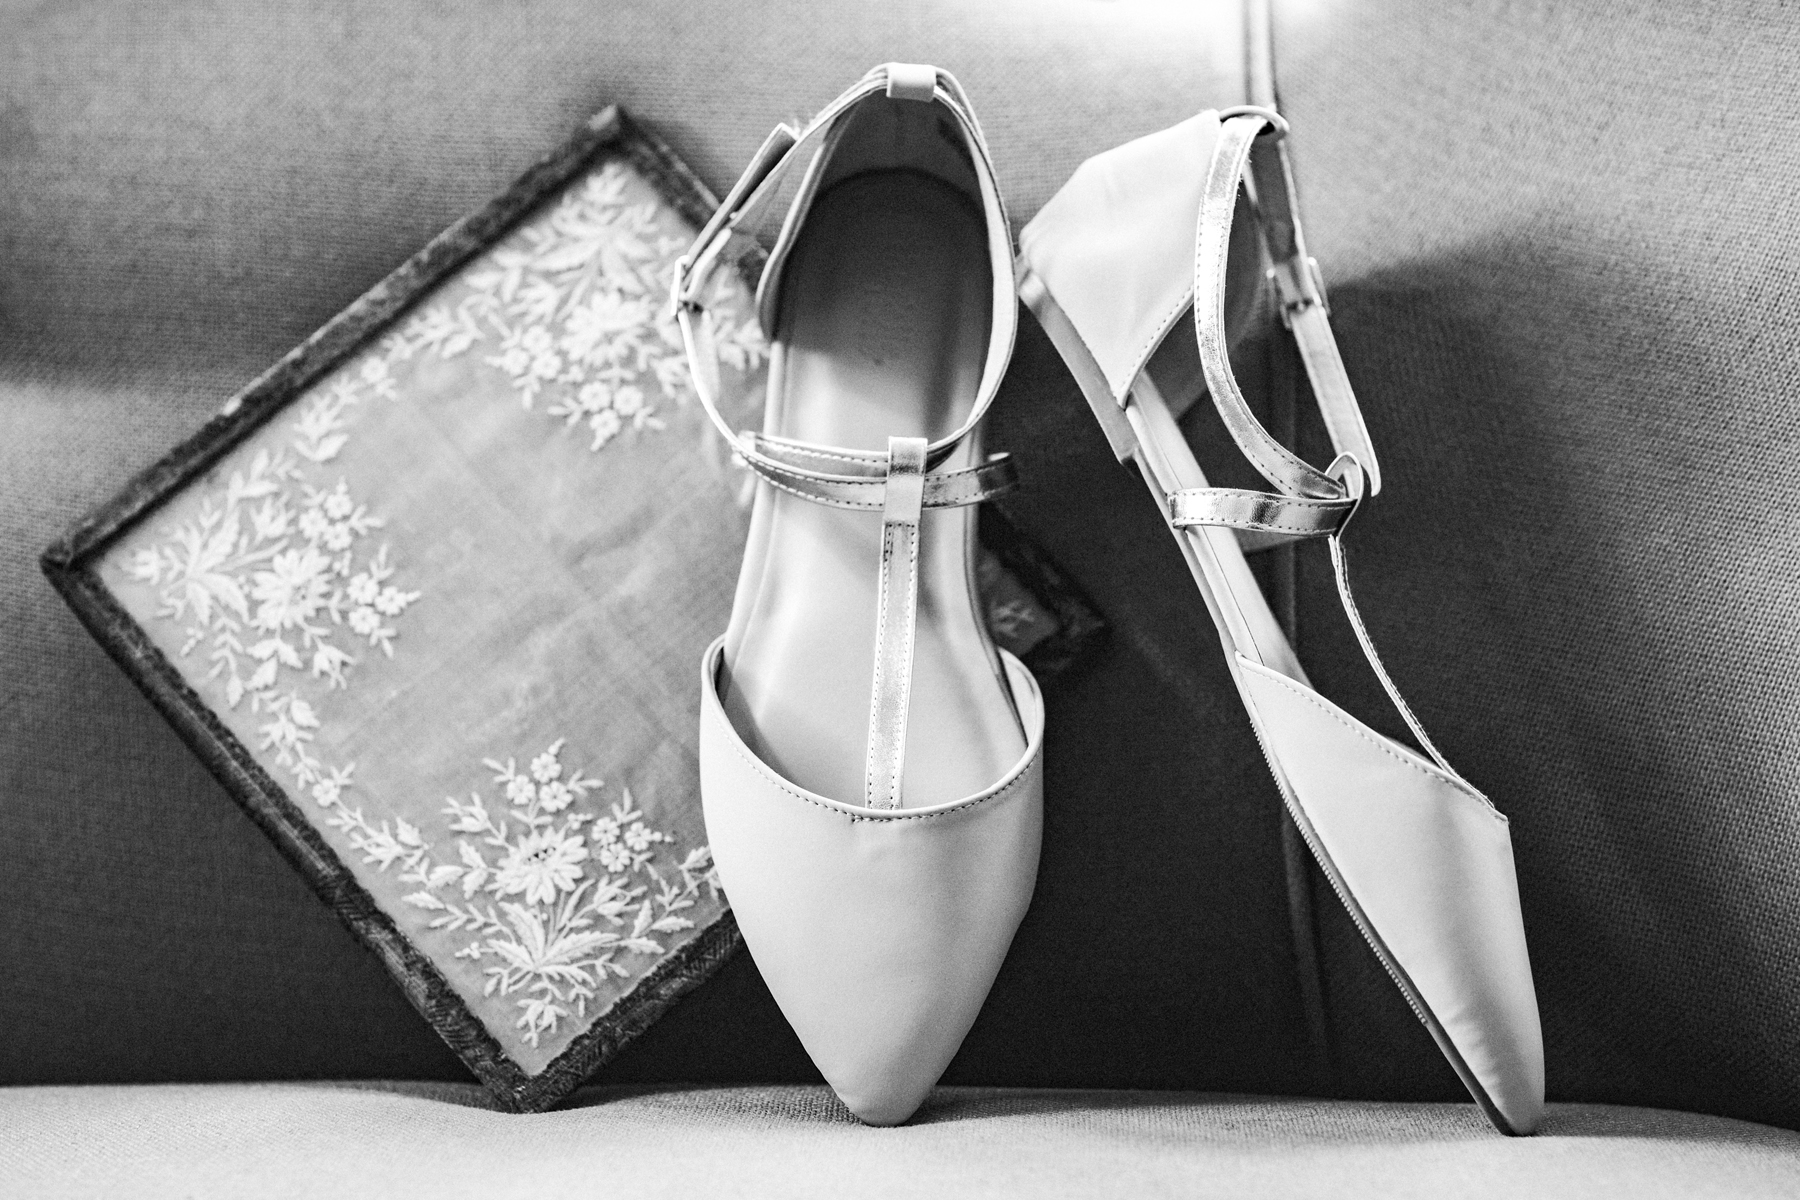   DON’T: Splurge on wedding shoes. No one really sees them. But DO make sure they are comfy and at least photogenic for your detail shots.   